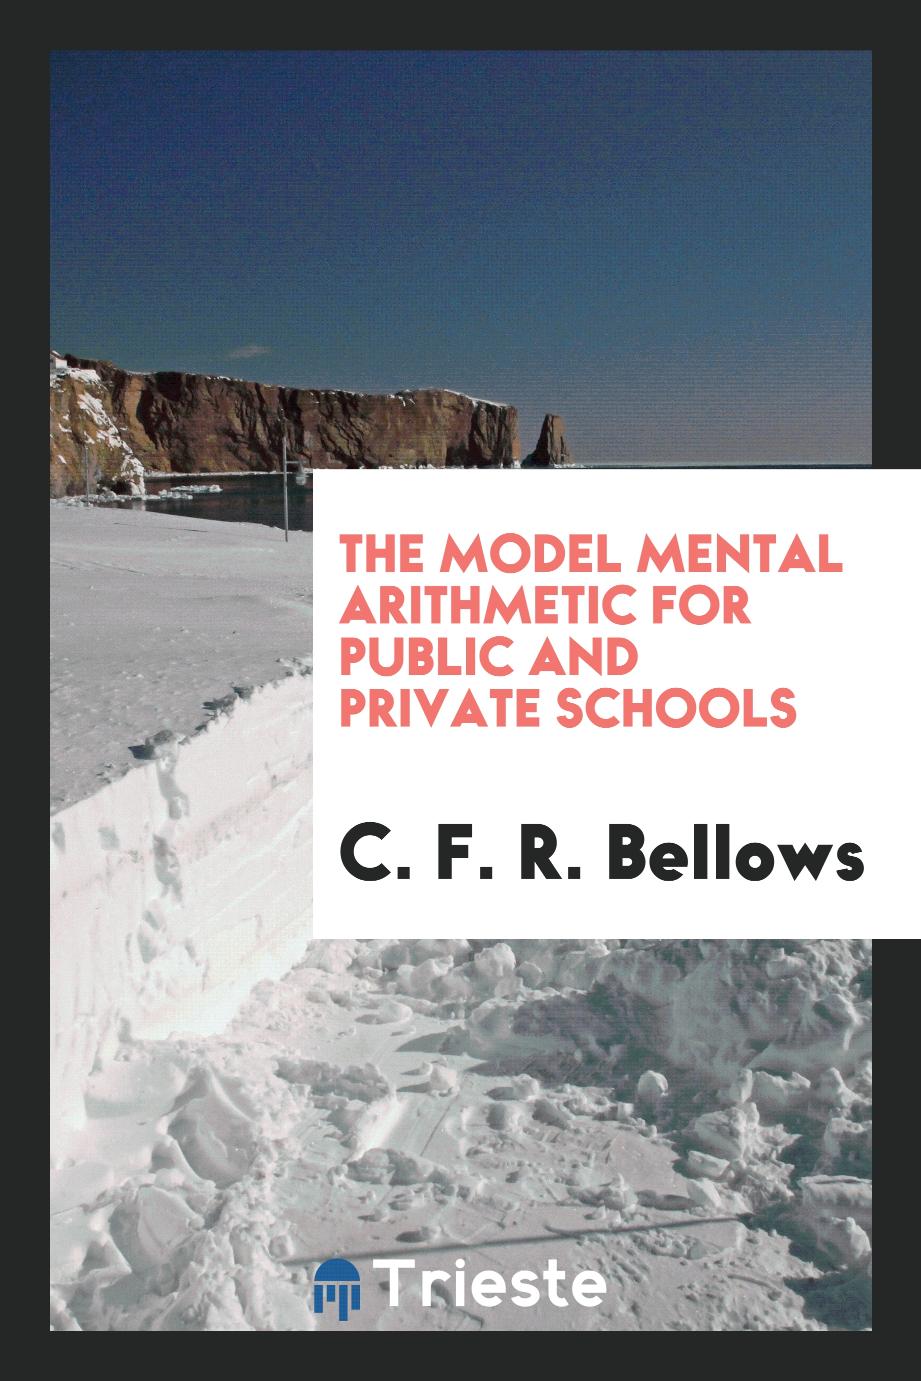 The Model Mental Arithmetic for Public and Private Schools